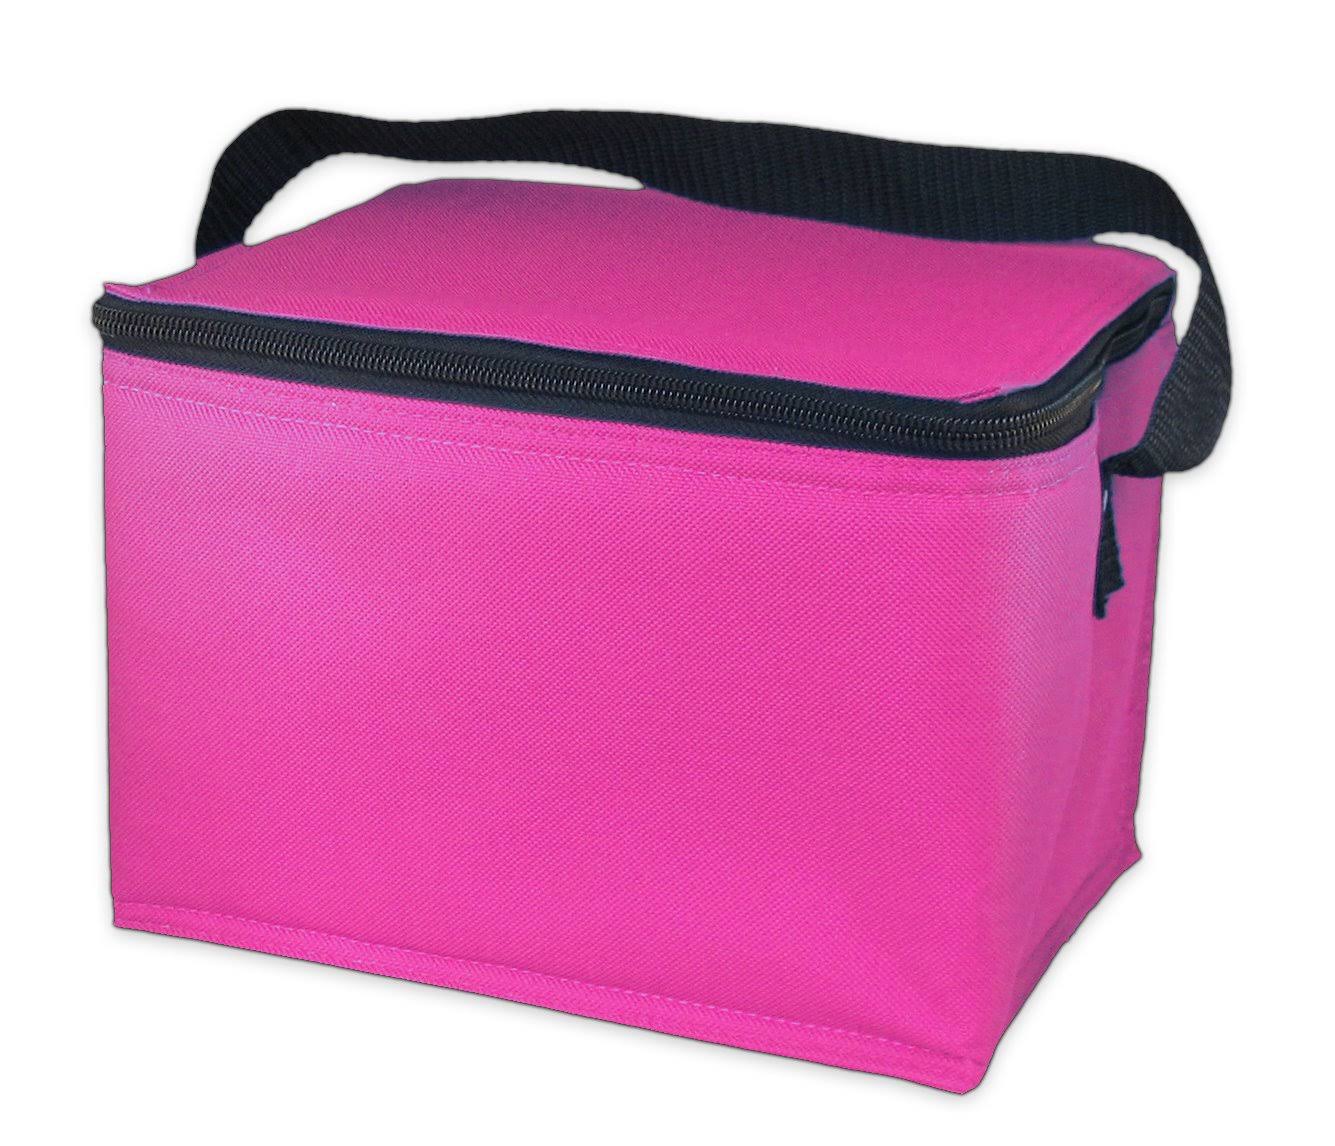 Easylunchboxes Insulated Lunch Box Cooler Bag Pink